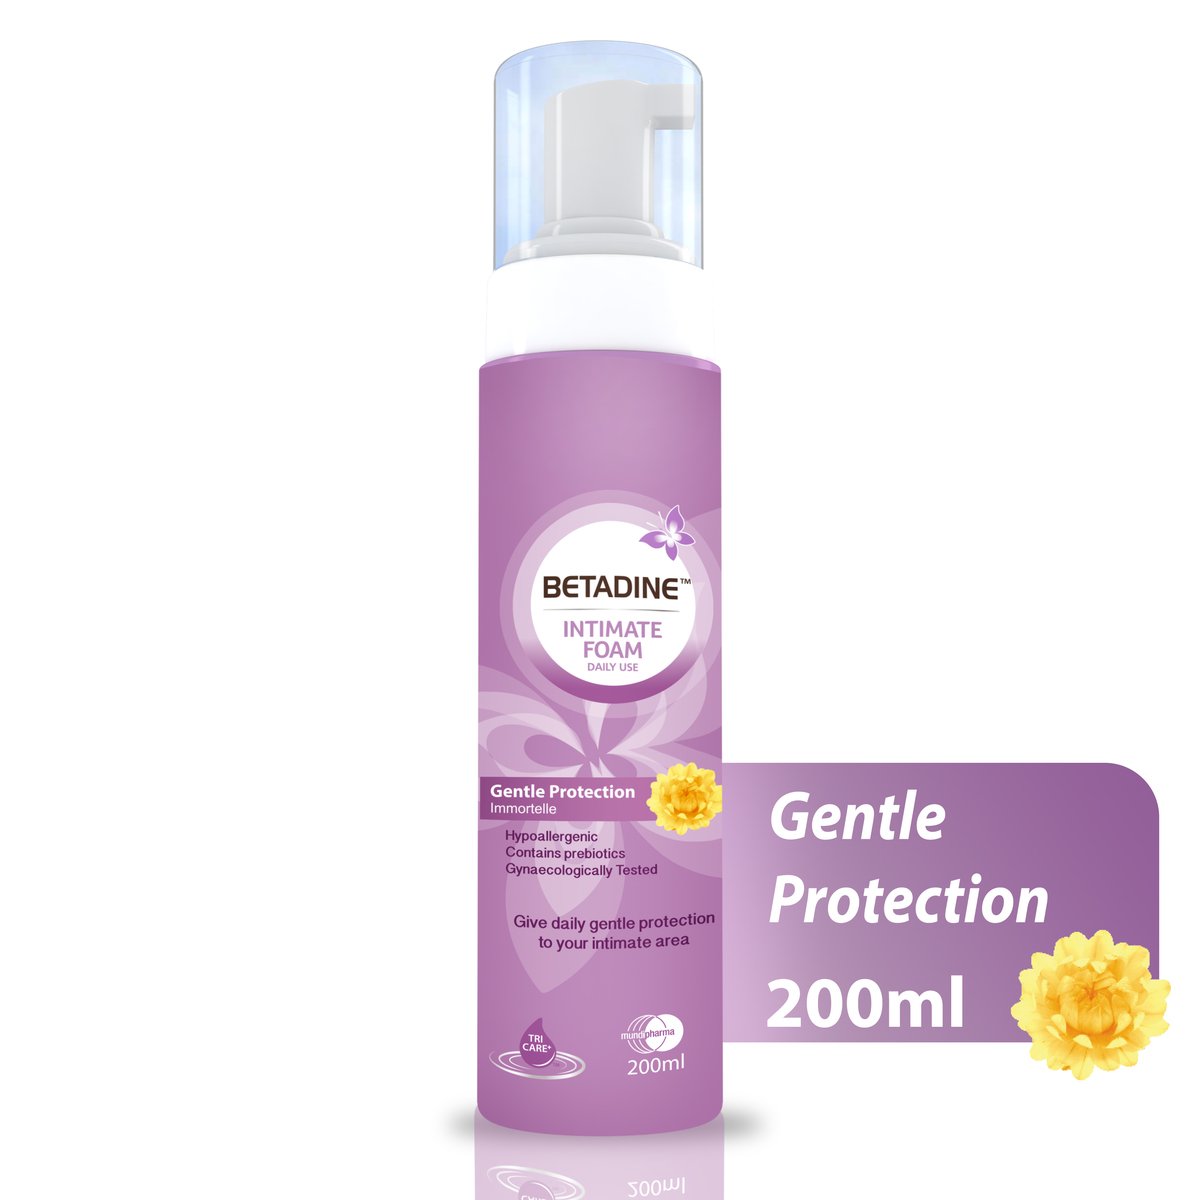 Betadine Intimate Foam with Gentle Protection 200ml